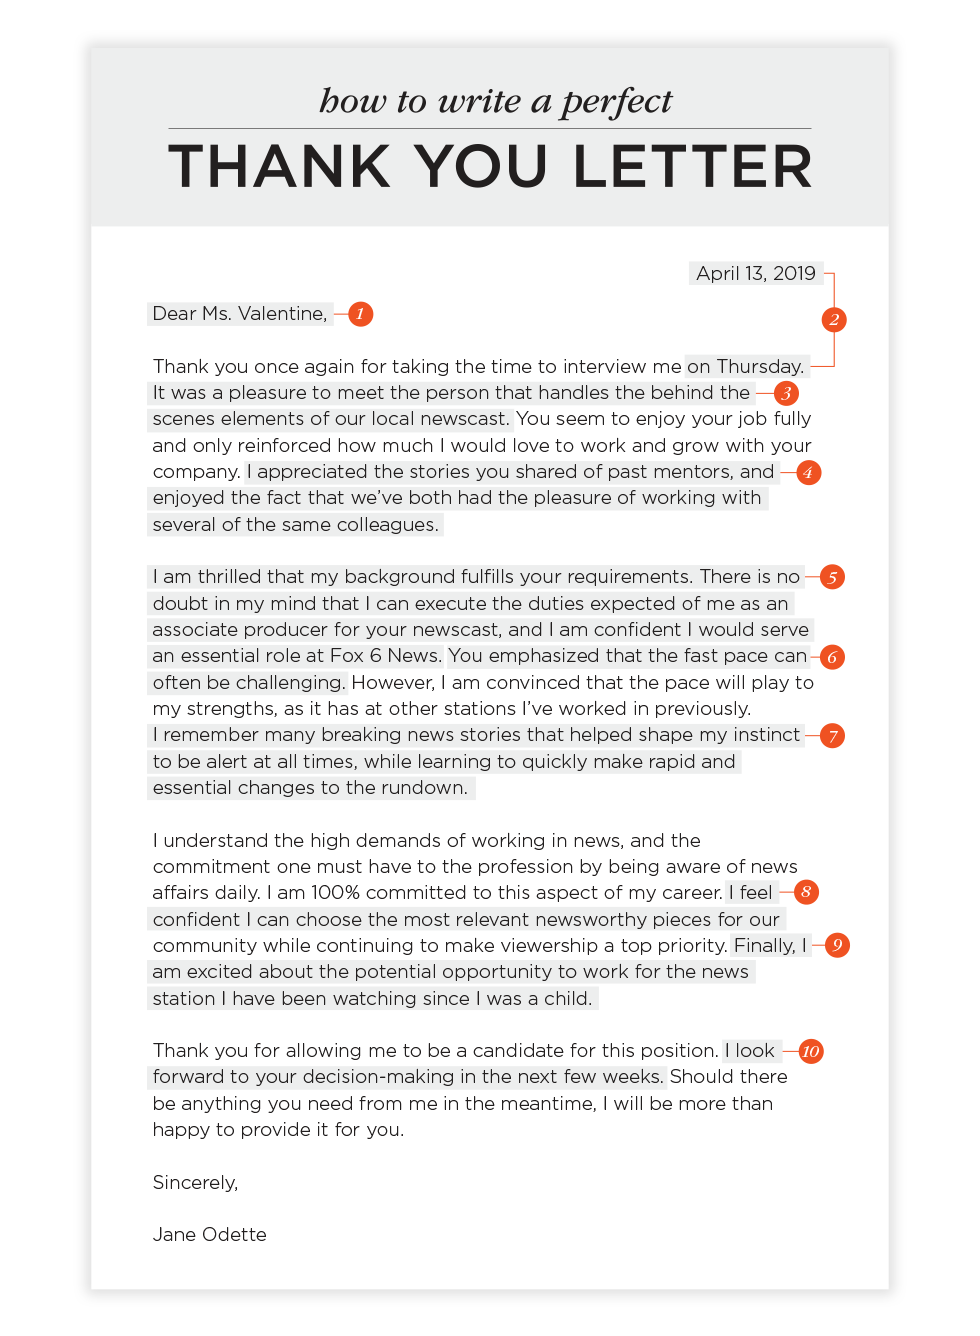 A Thank You Letter from www.shutterfly.com